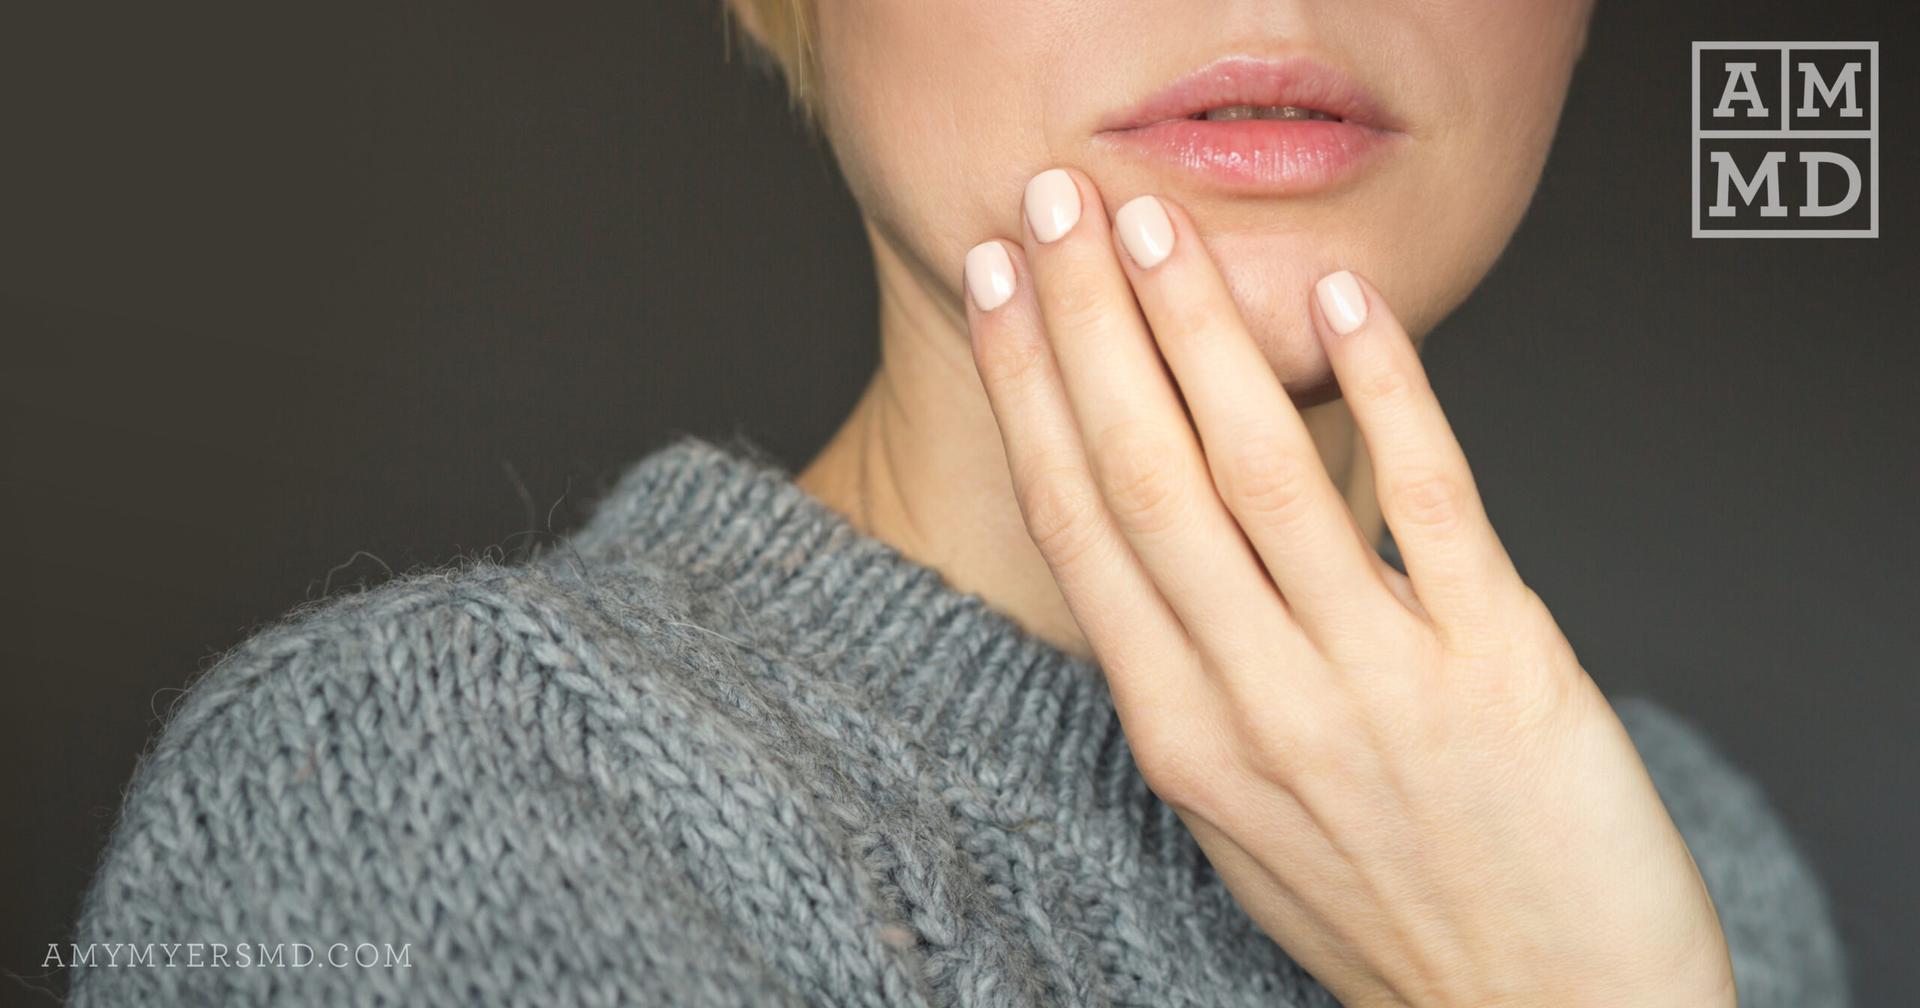 Care For Your Hair, Skin, and Nails In Cold Weather